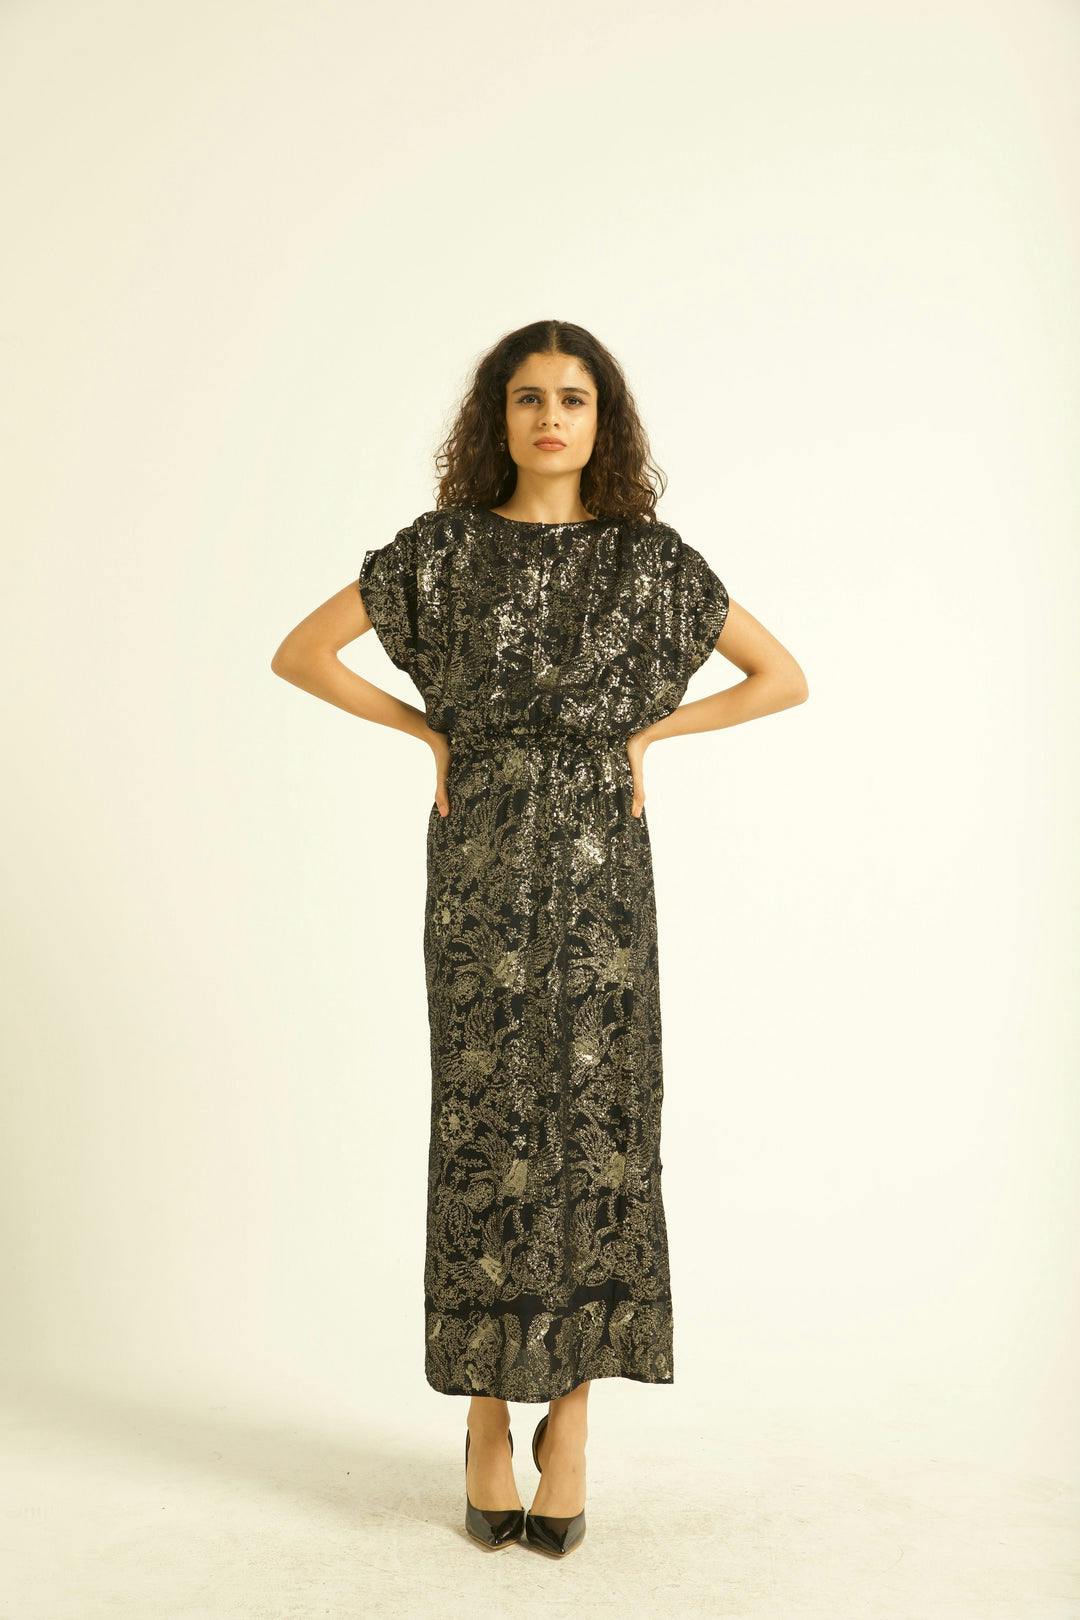 Paisley Sequin Dress, a product by Dash & Dot